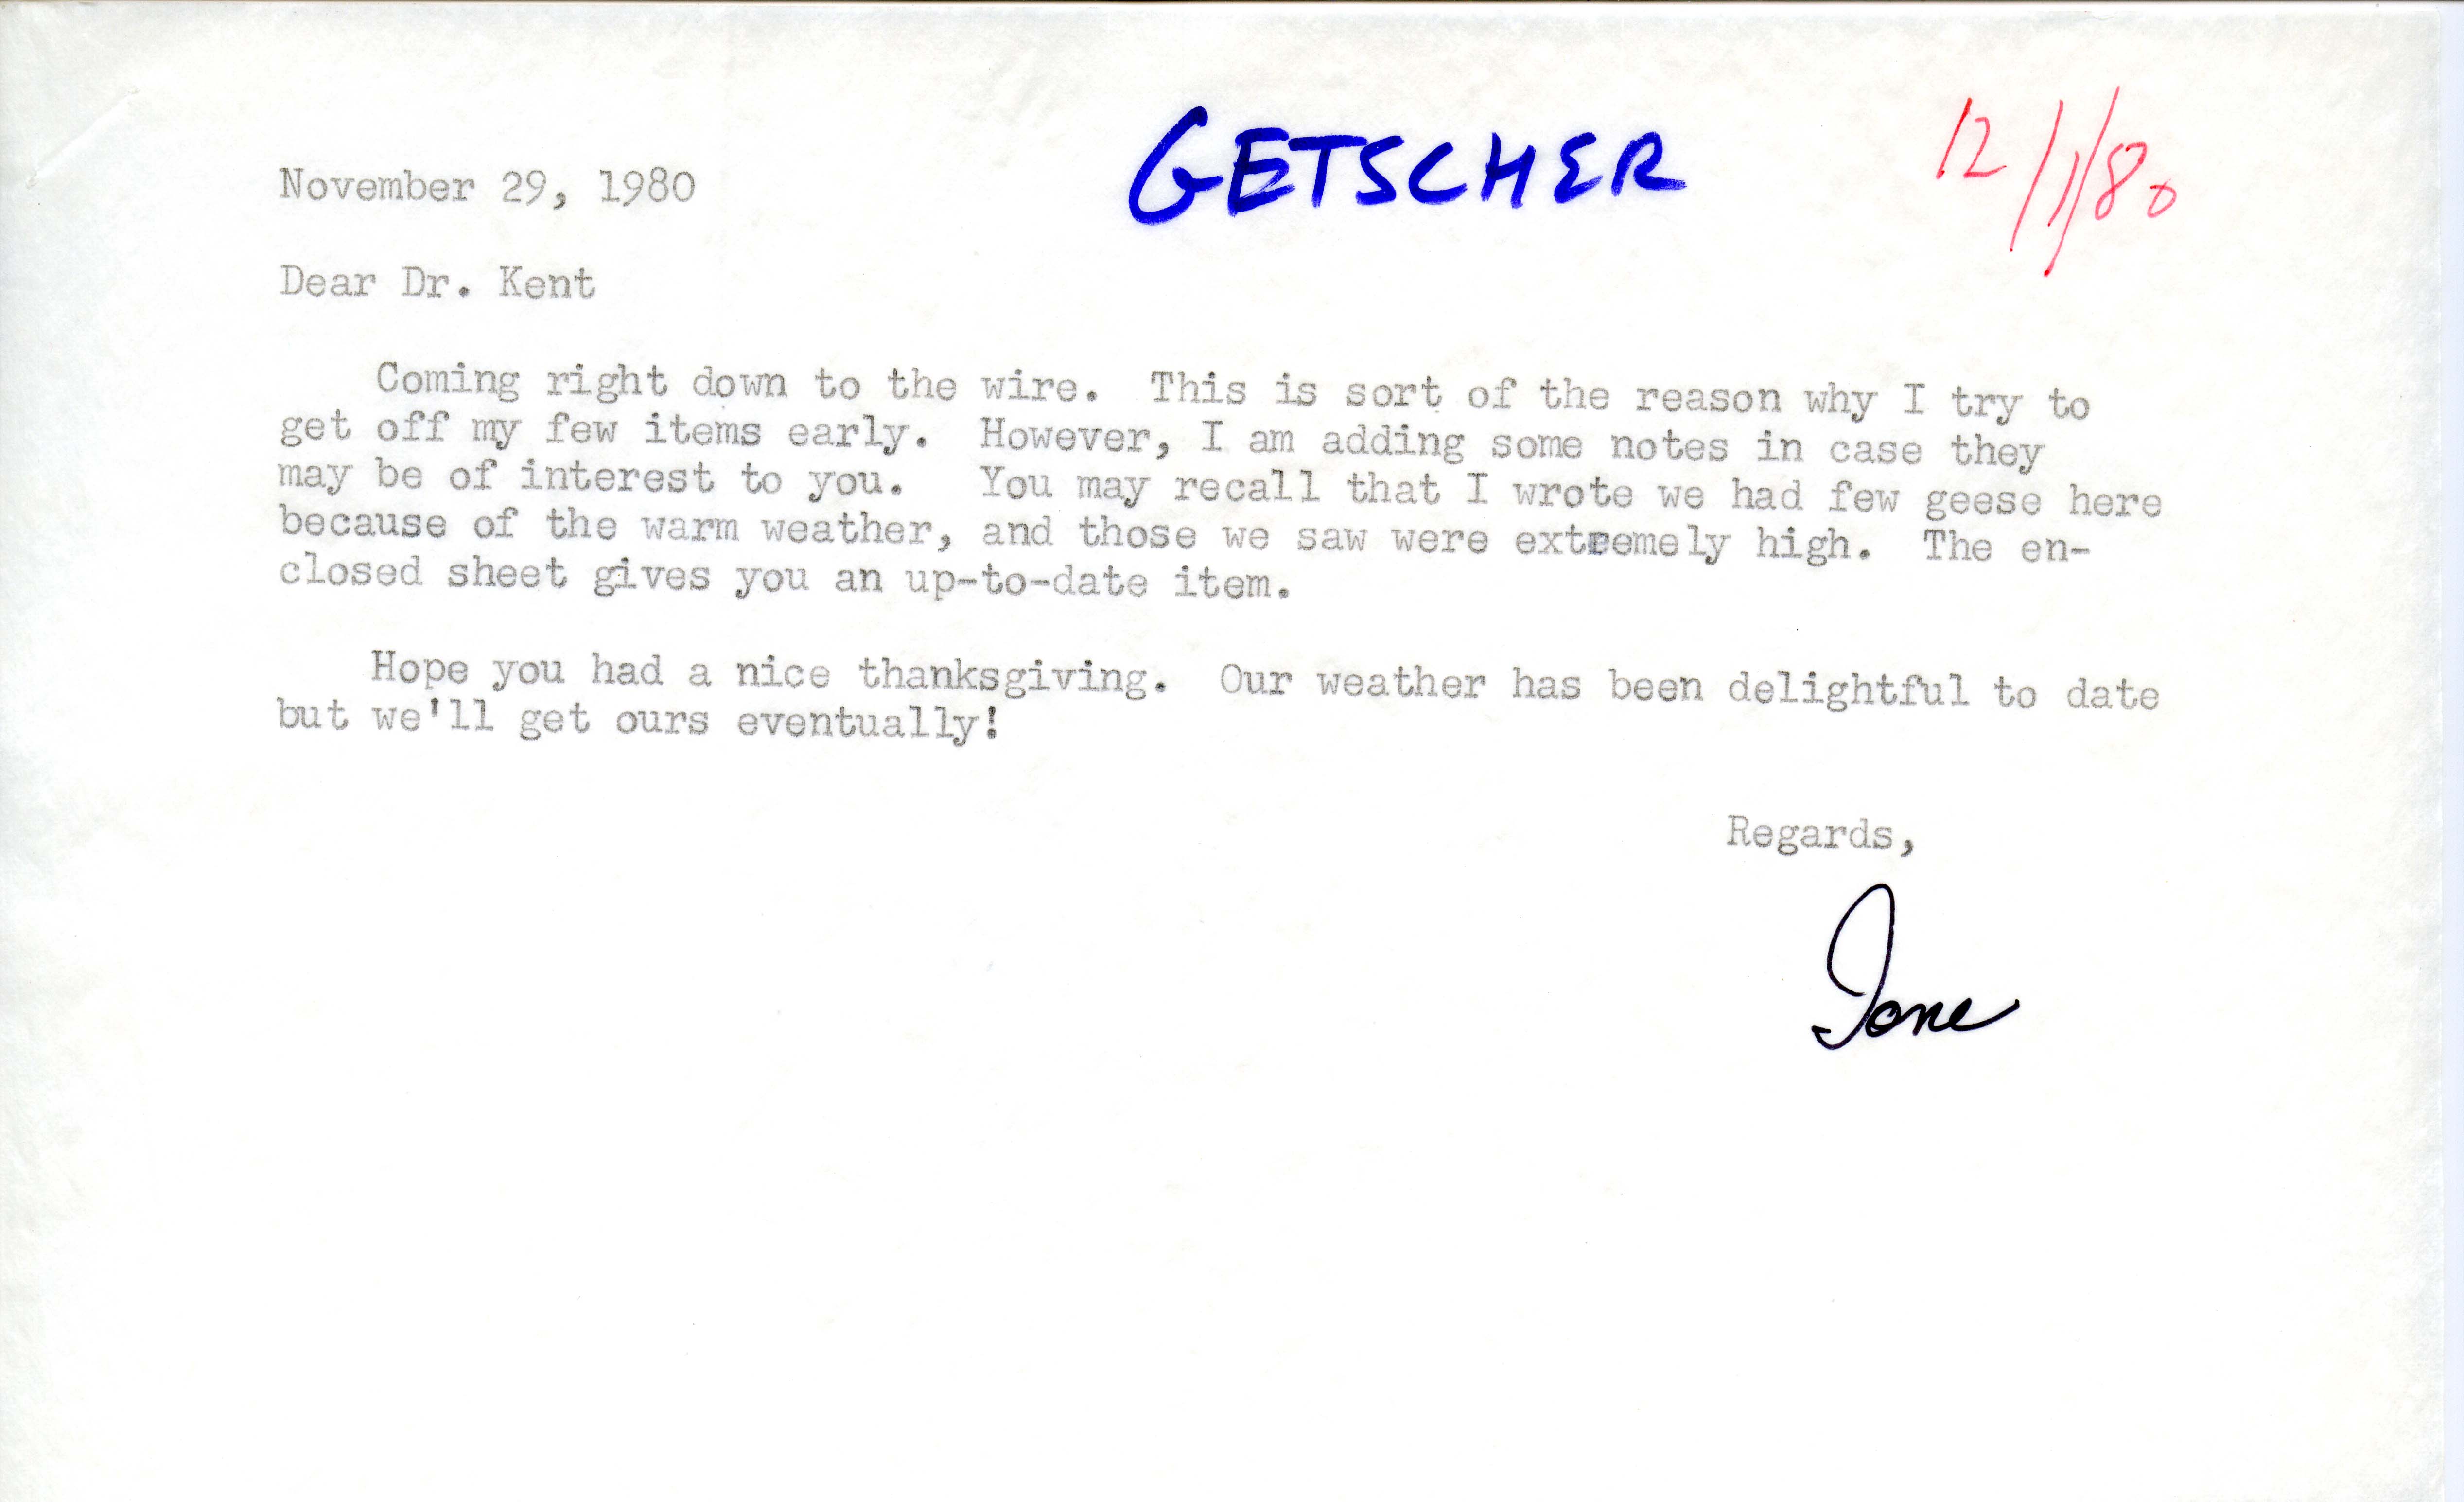 Ione Getscher letter to Thomas Kent regarding Geese and other birds sighted, November 29, 1980